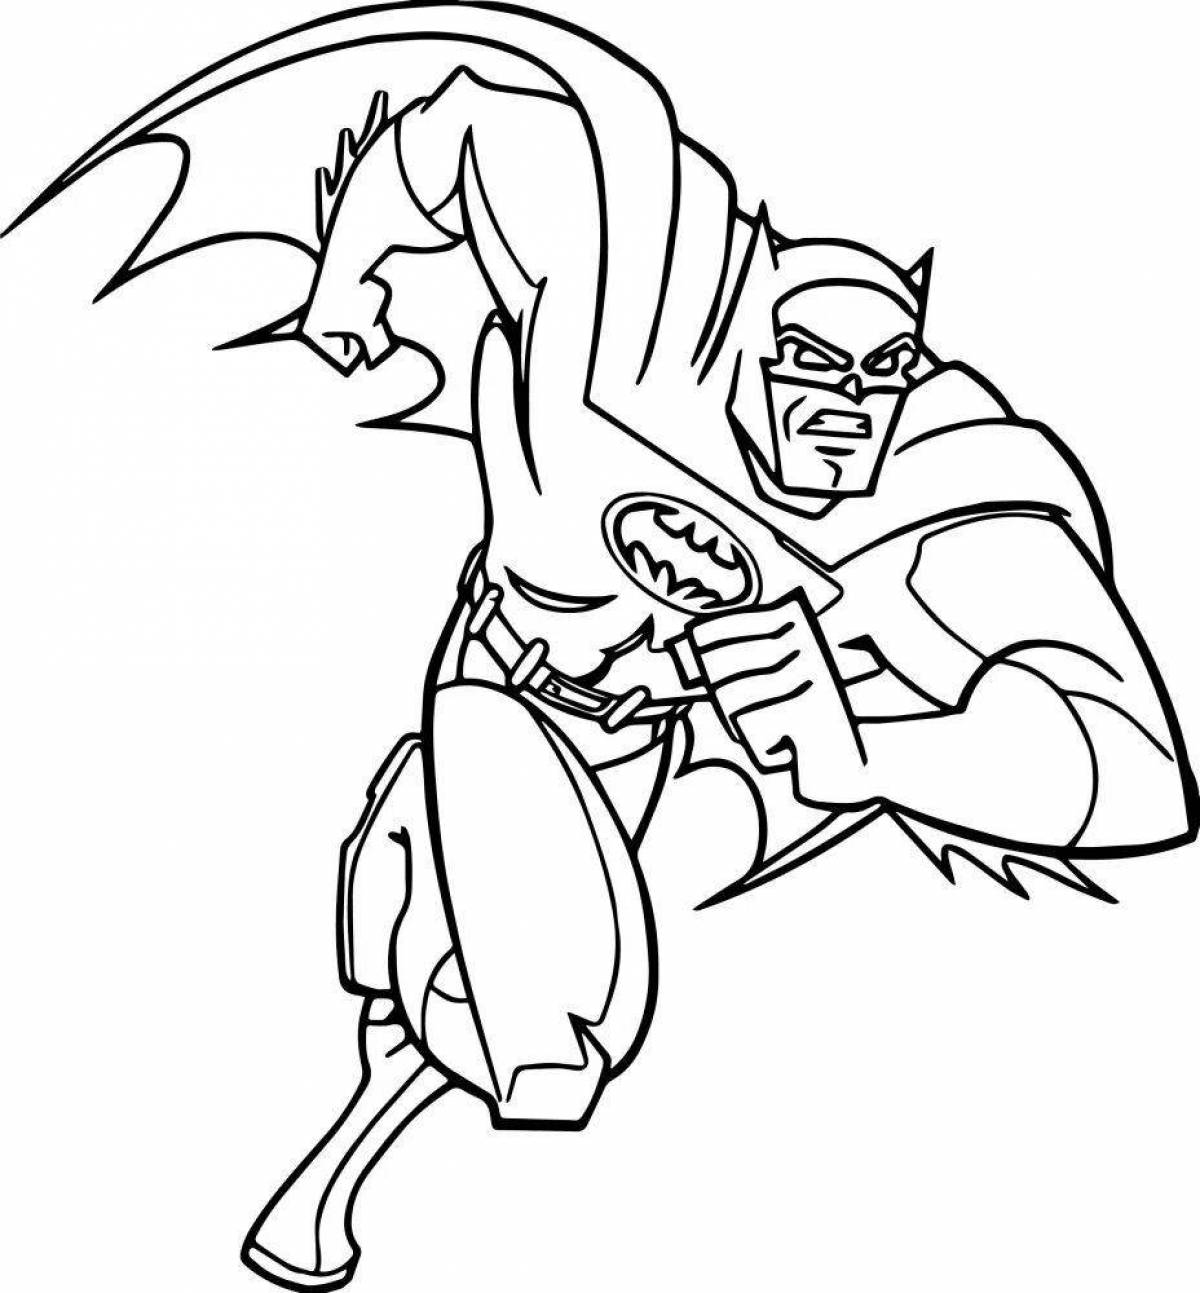 Scary supervillain coloring pages